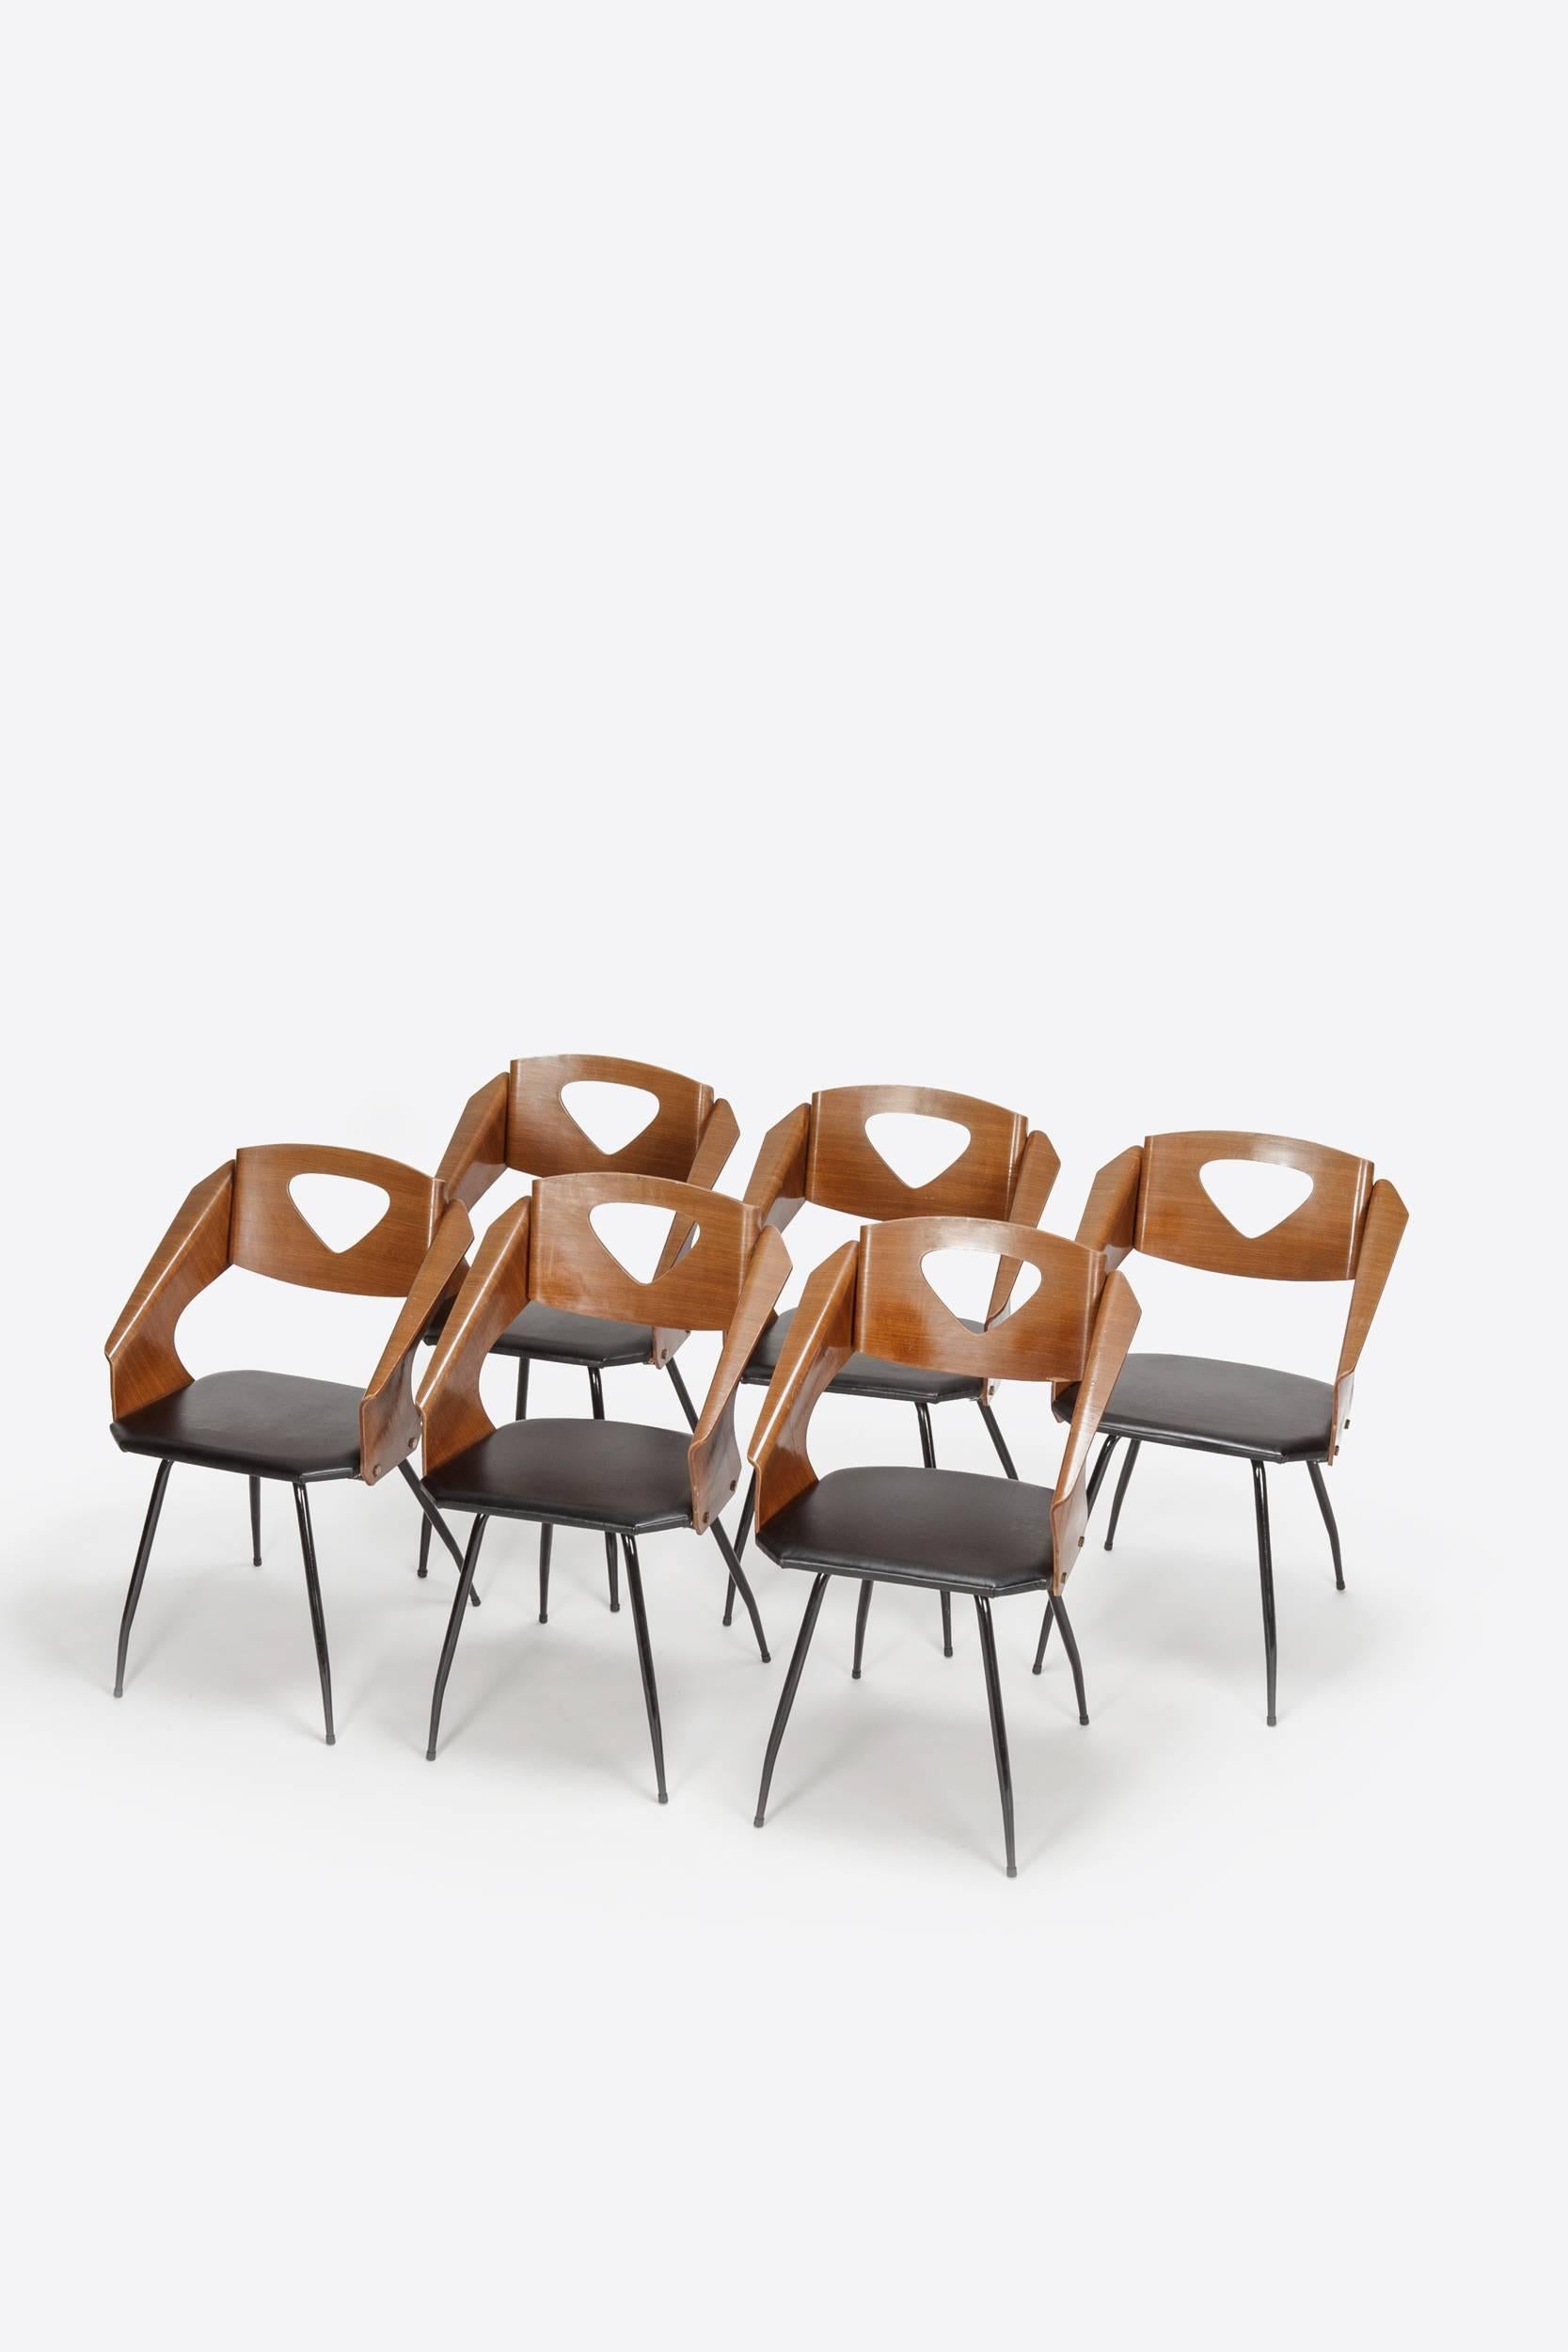 Incredible set of six Carlo Ratti chairs manufactured by his company Industria Legni Curva in Lissone, Italy. Moulded mahogany plywood on a black lacquered metal base, the seats were recently new covered with black leather. High-end quality